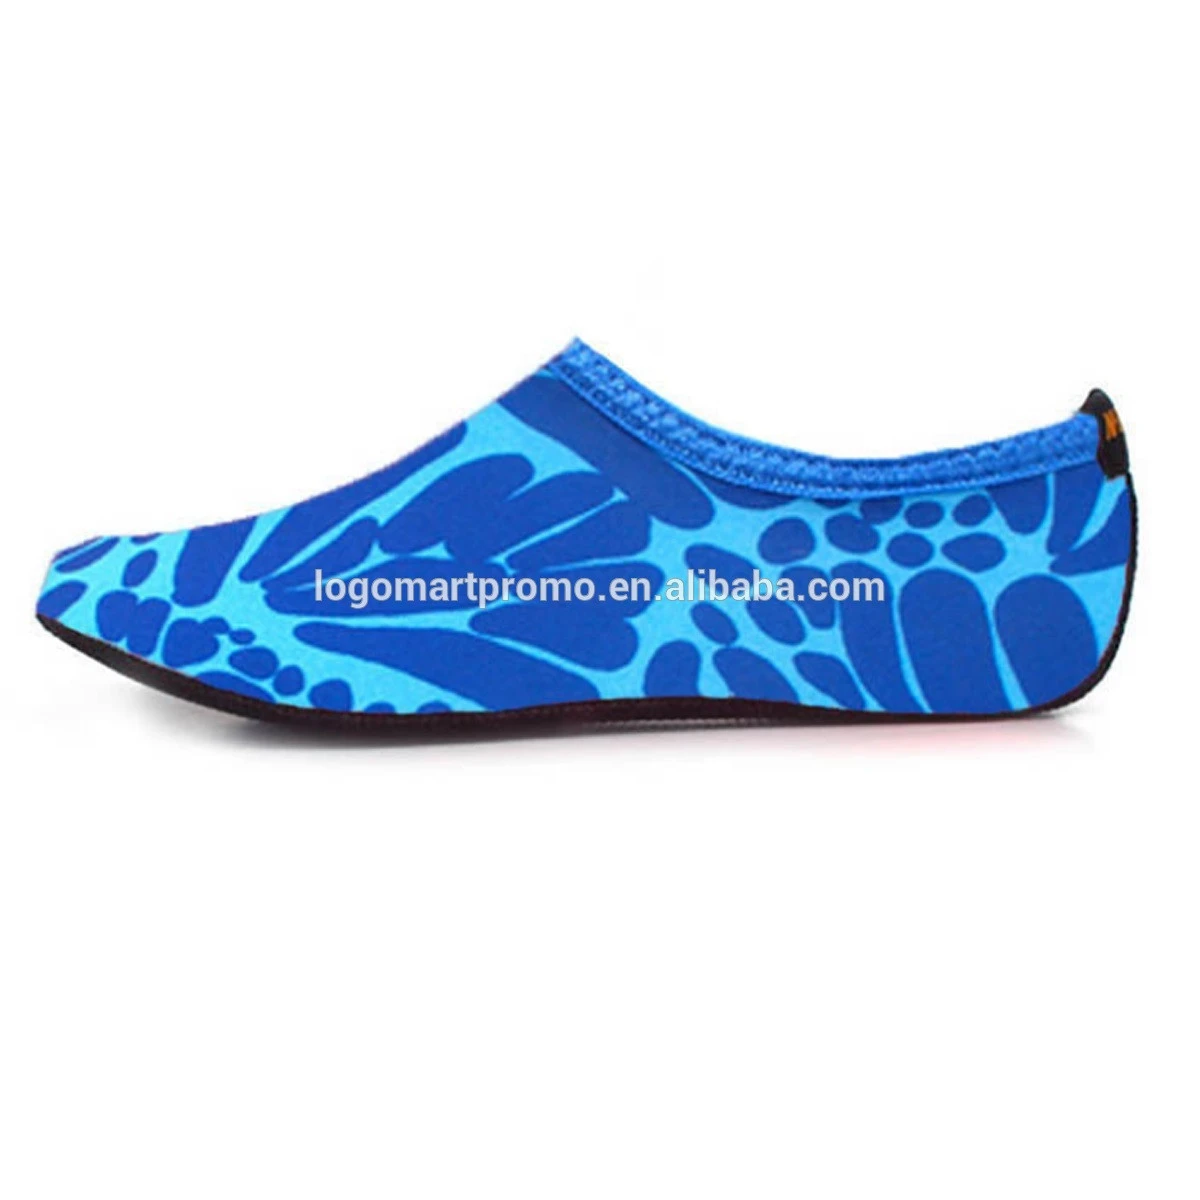 Quick Dry Beach Swim Sports Water Shoes for Mens Womens Garden Shoes,Aqua Shoes for Pool Surfing Walking